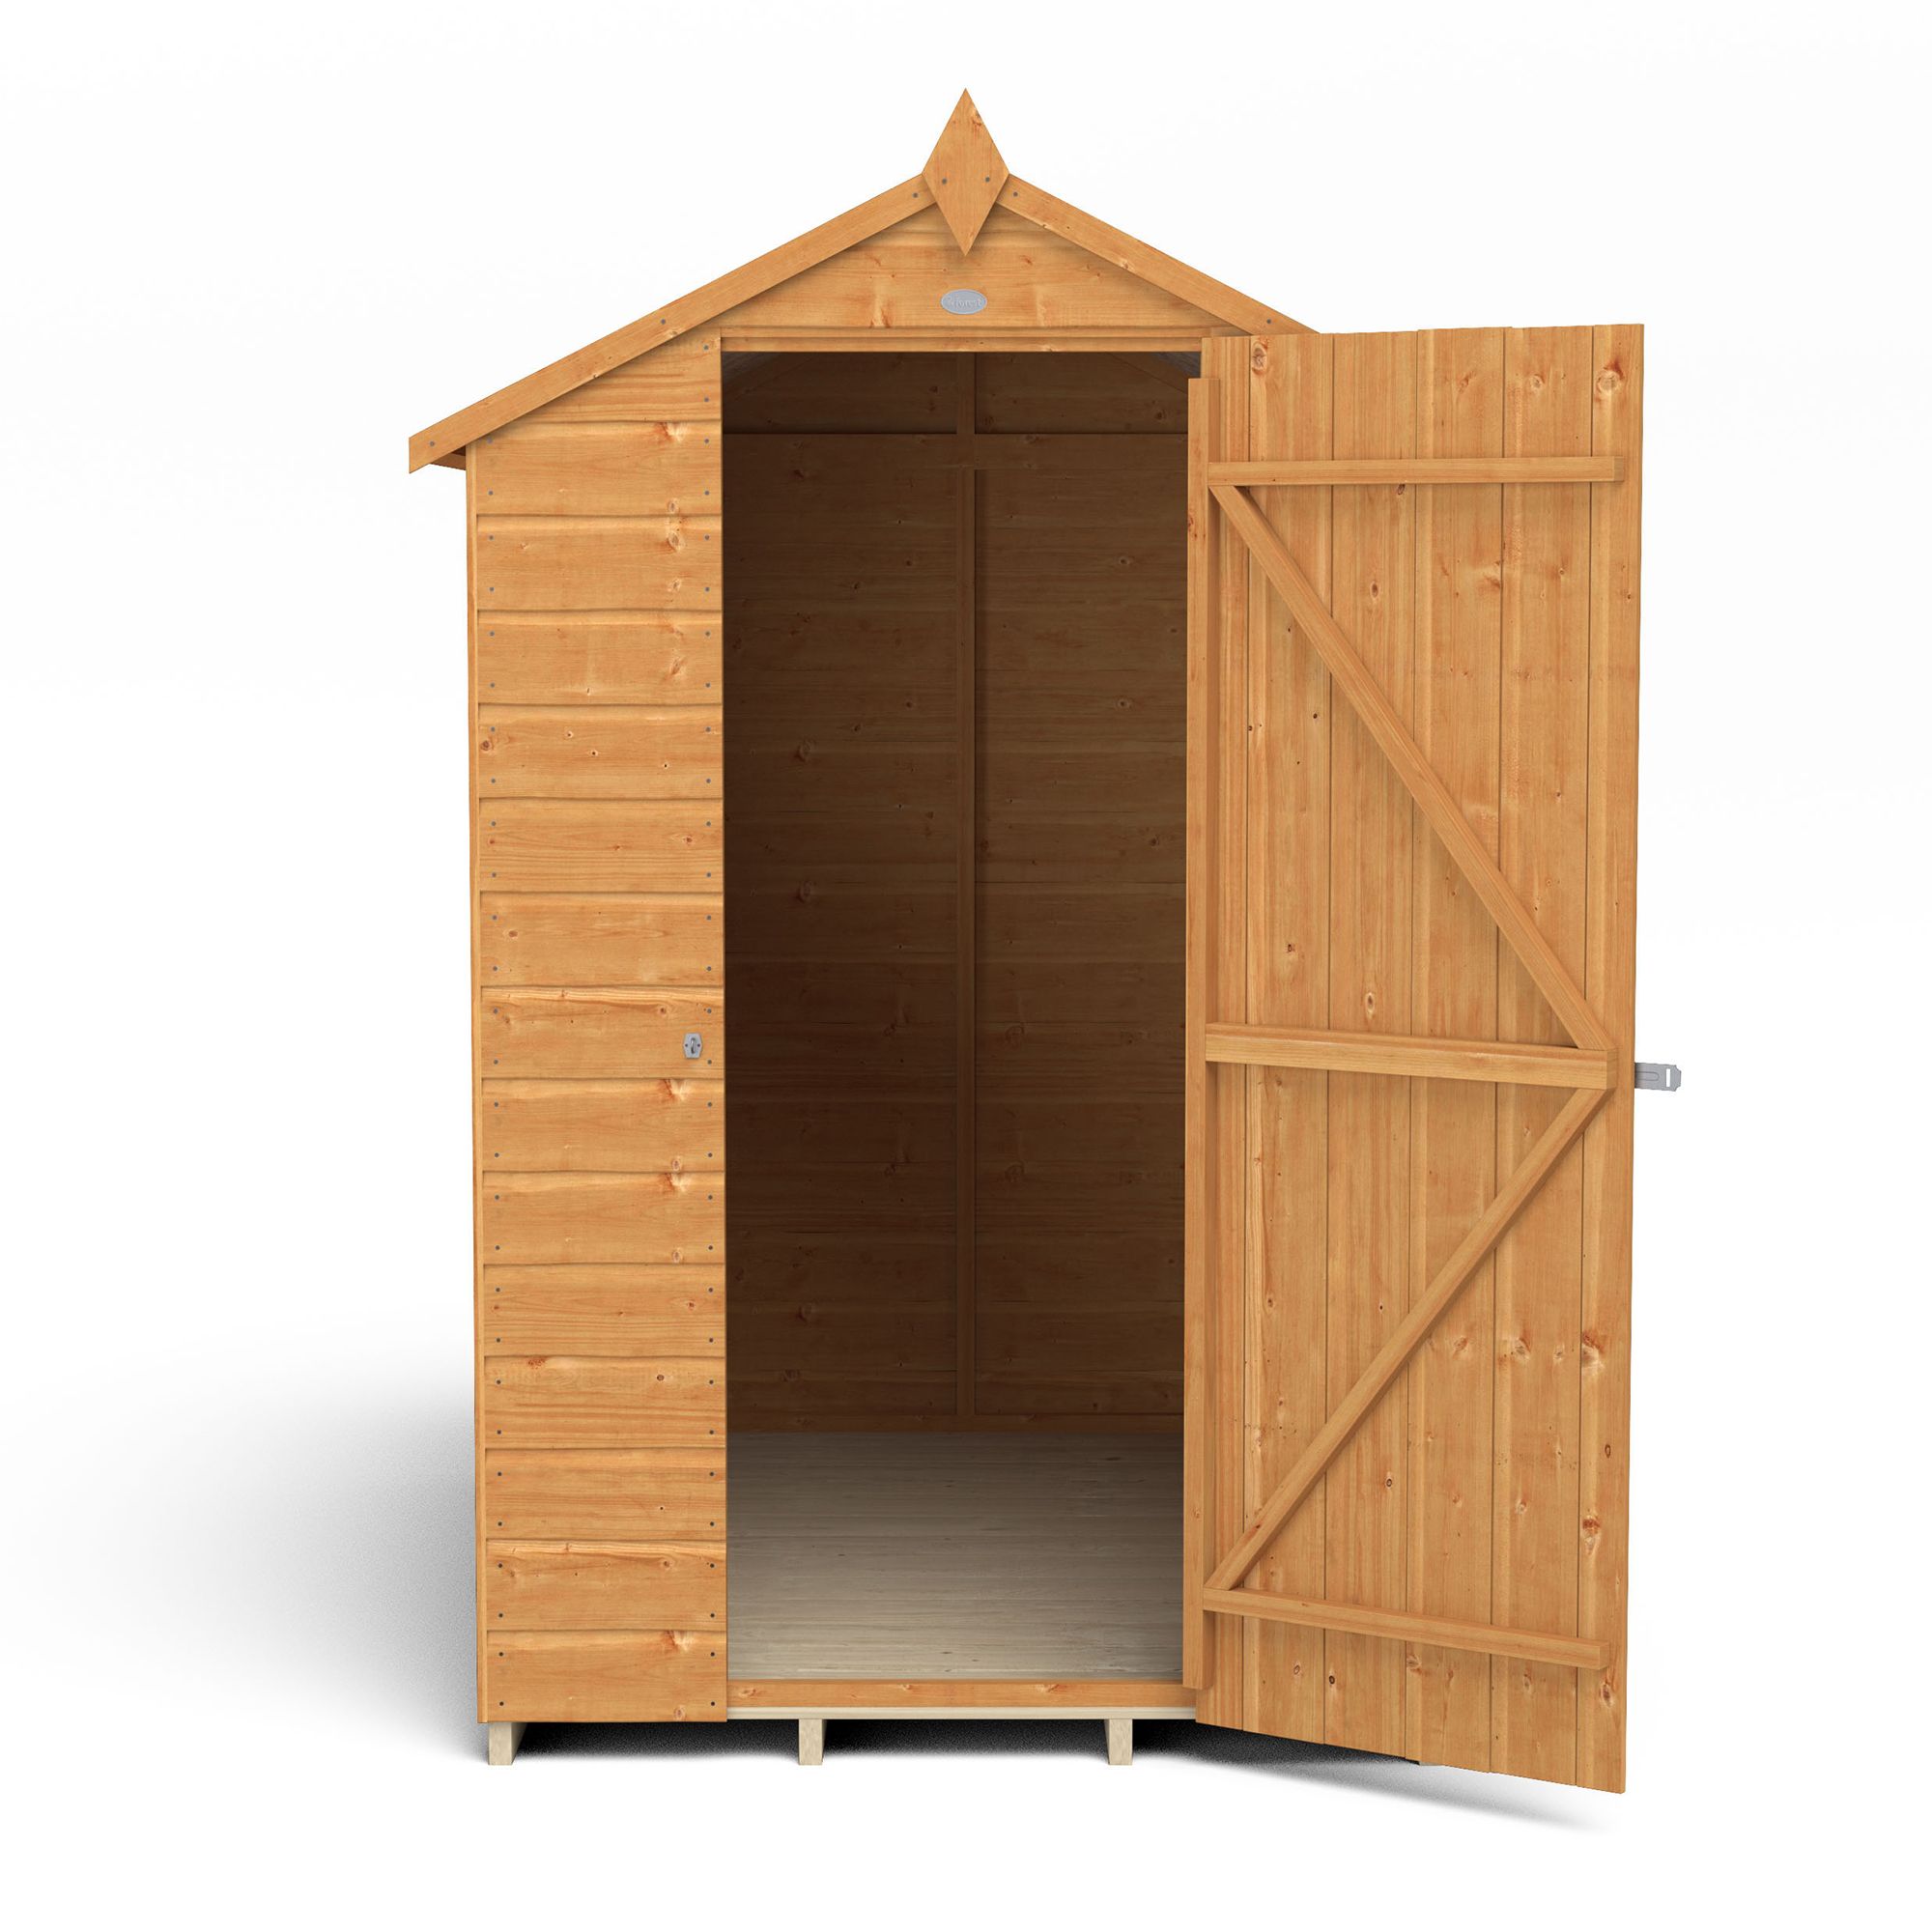 Forest Garden Shiplap 6x4 ft Apex Wooden Dip treated Shed with floor & 1 window (Base included) - Assembly service included